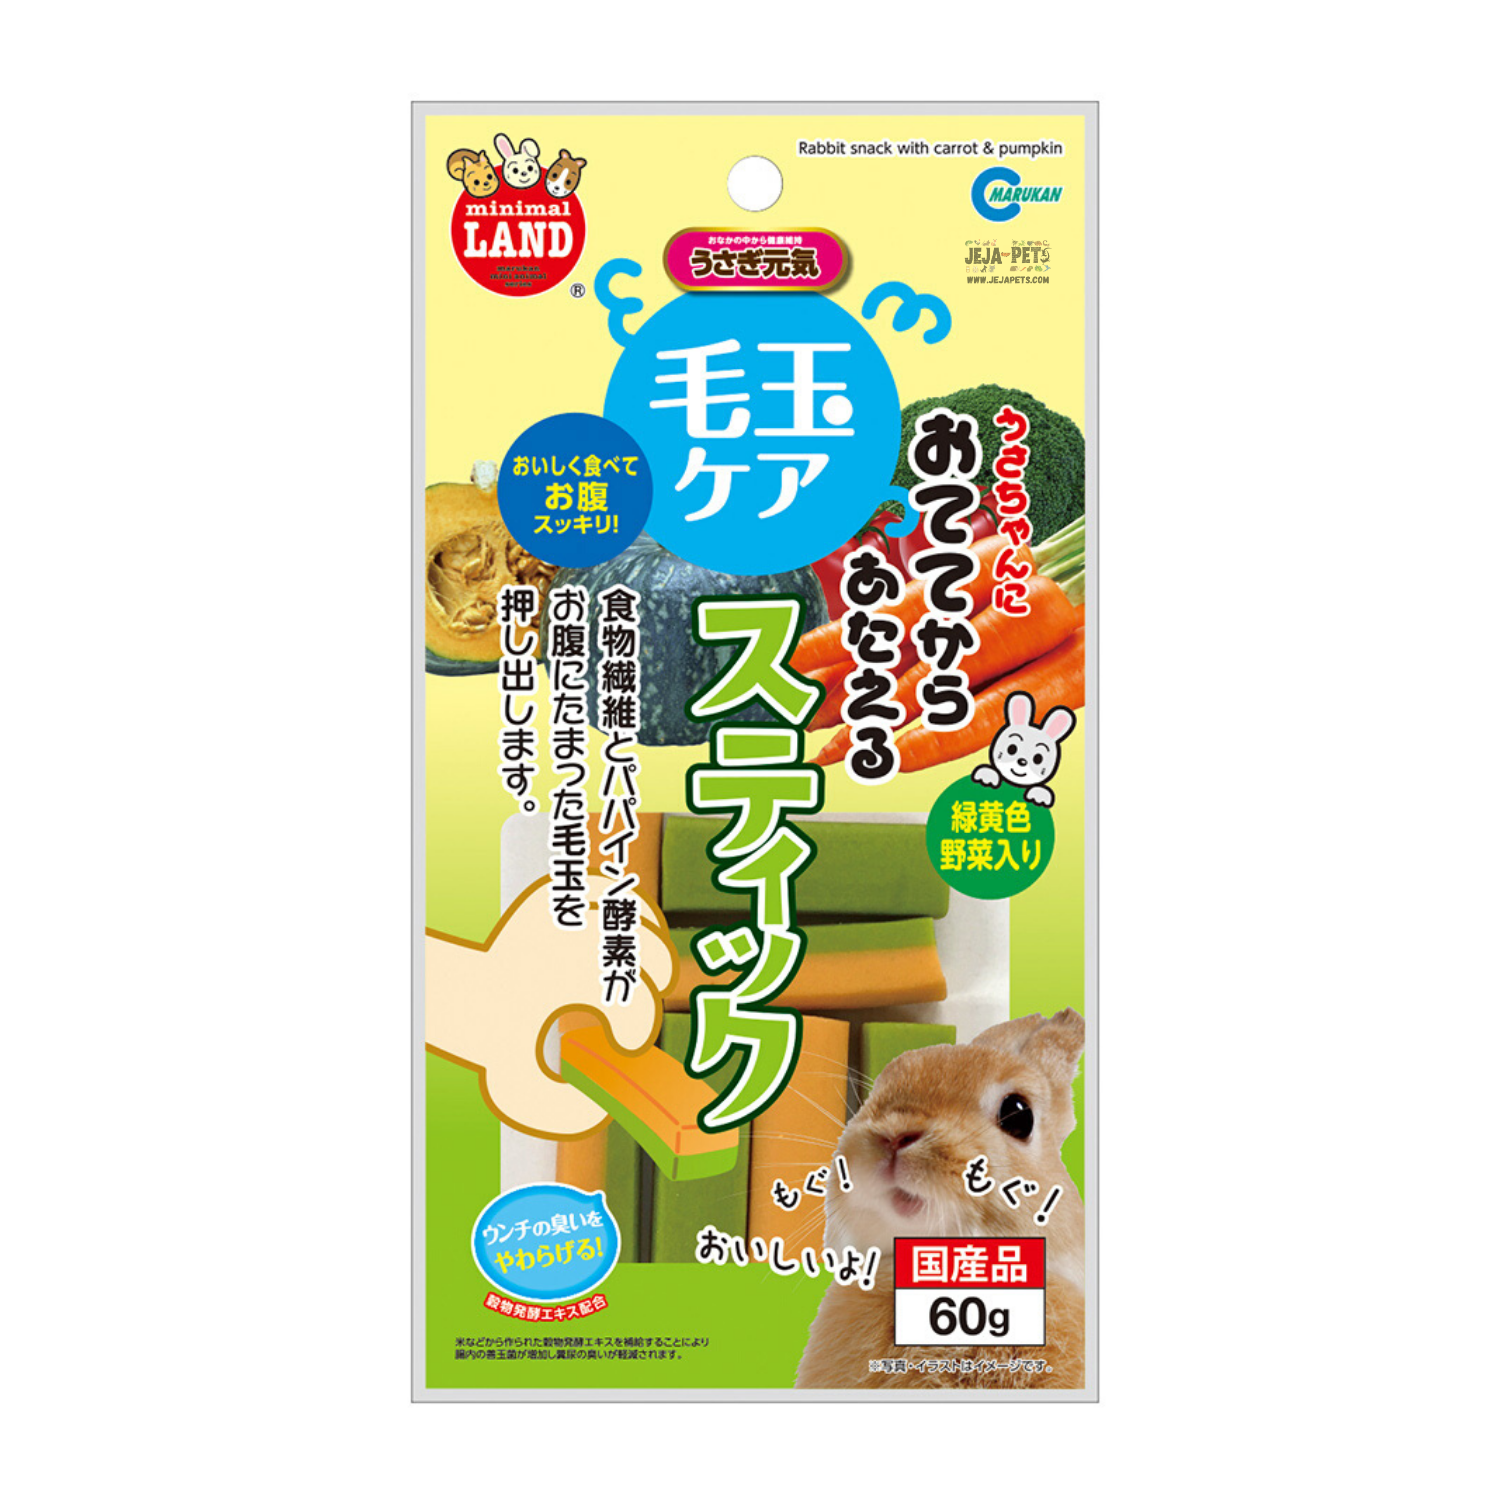 [DISCONTINUED] Marukan Hairball Care Vegetable Stick - 60g